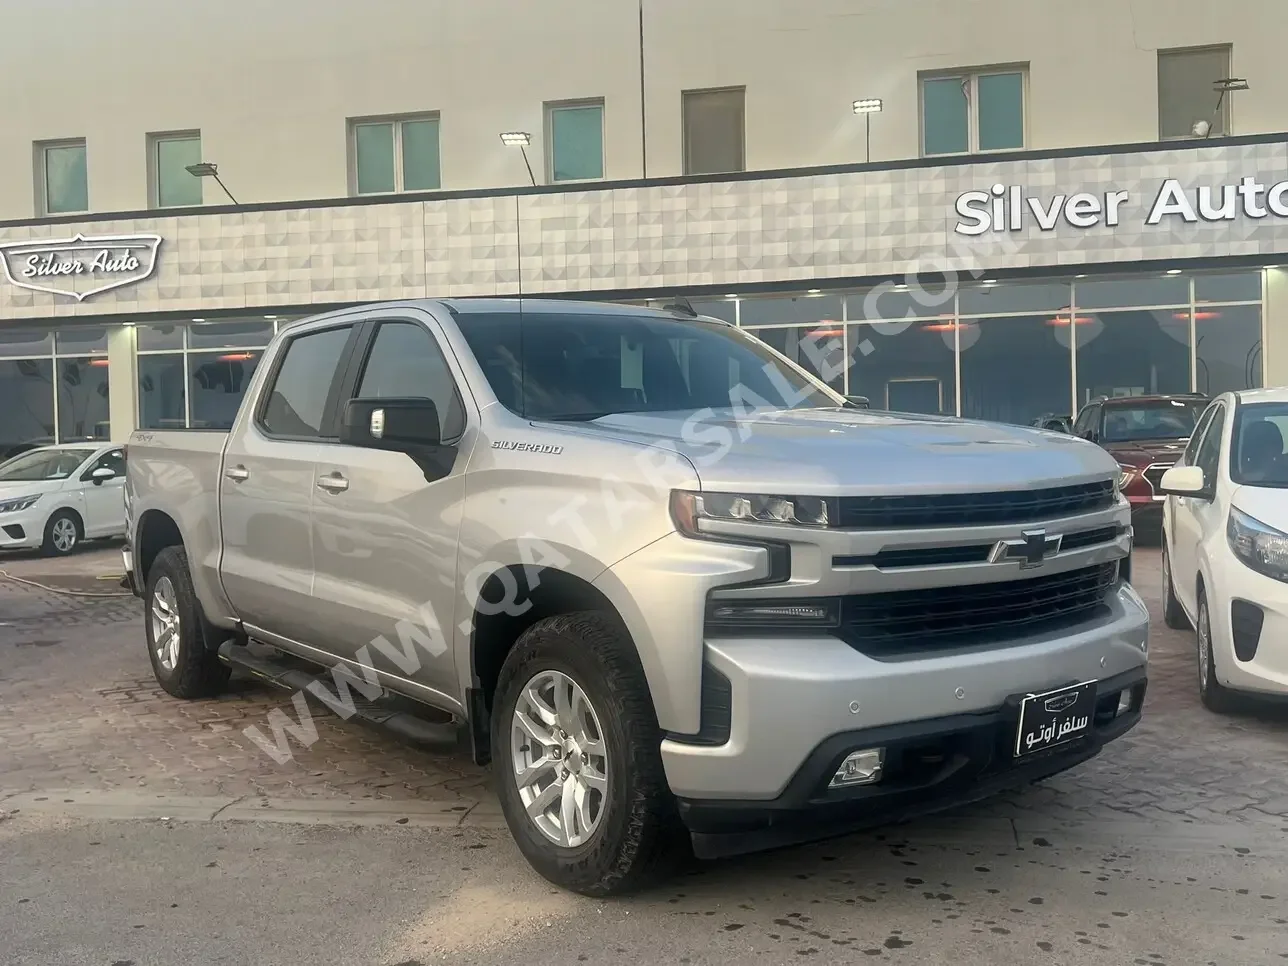 Chevrolet  Silverado  RST  2020  Automatic  29,000 Km  8 Cylinder  Four Wheel Drive (4WD)  Pick Up  Silver  With Warranty